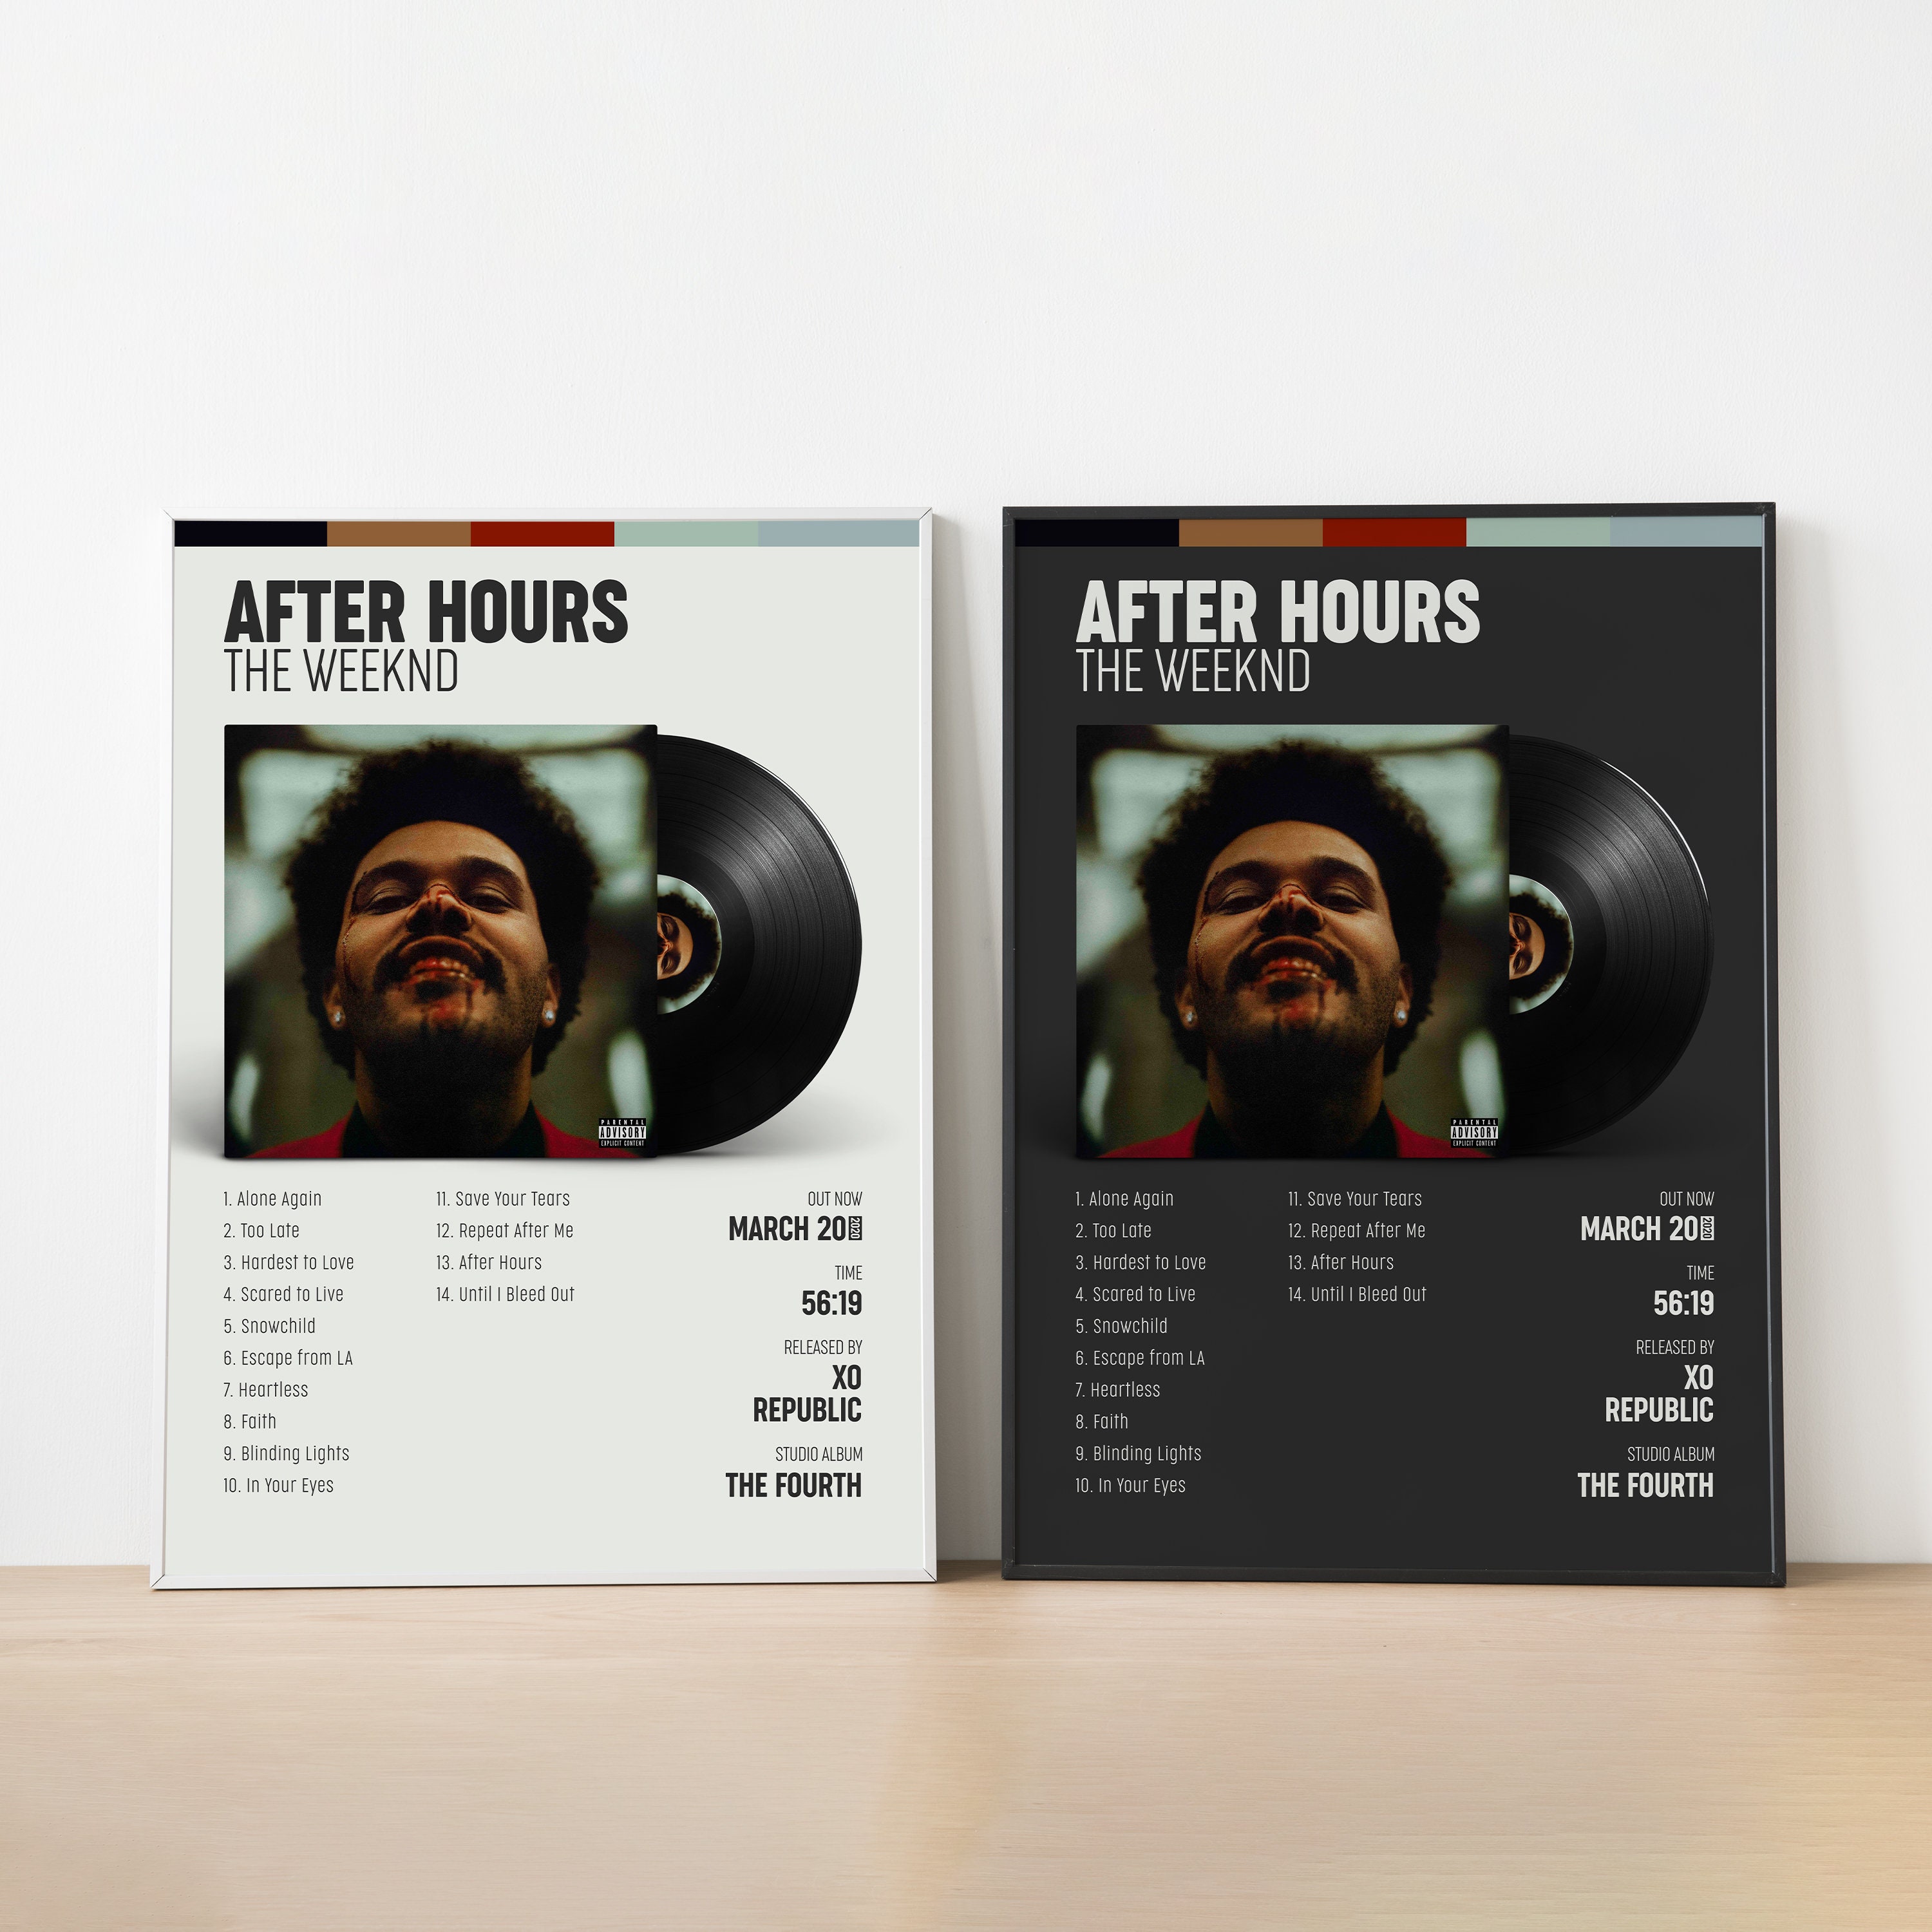 Discover After Hours Poster, The Weeknd Poster Album Cover Poster, Home Decor, Music Decor - The Weeknd